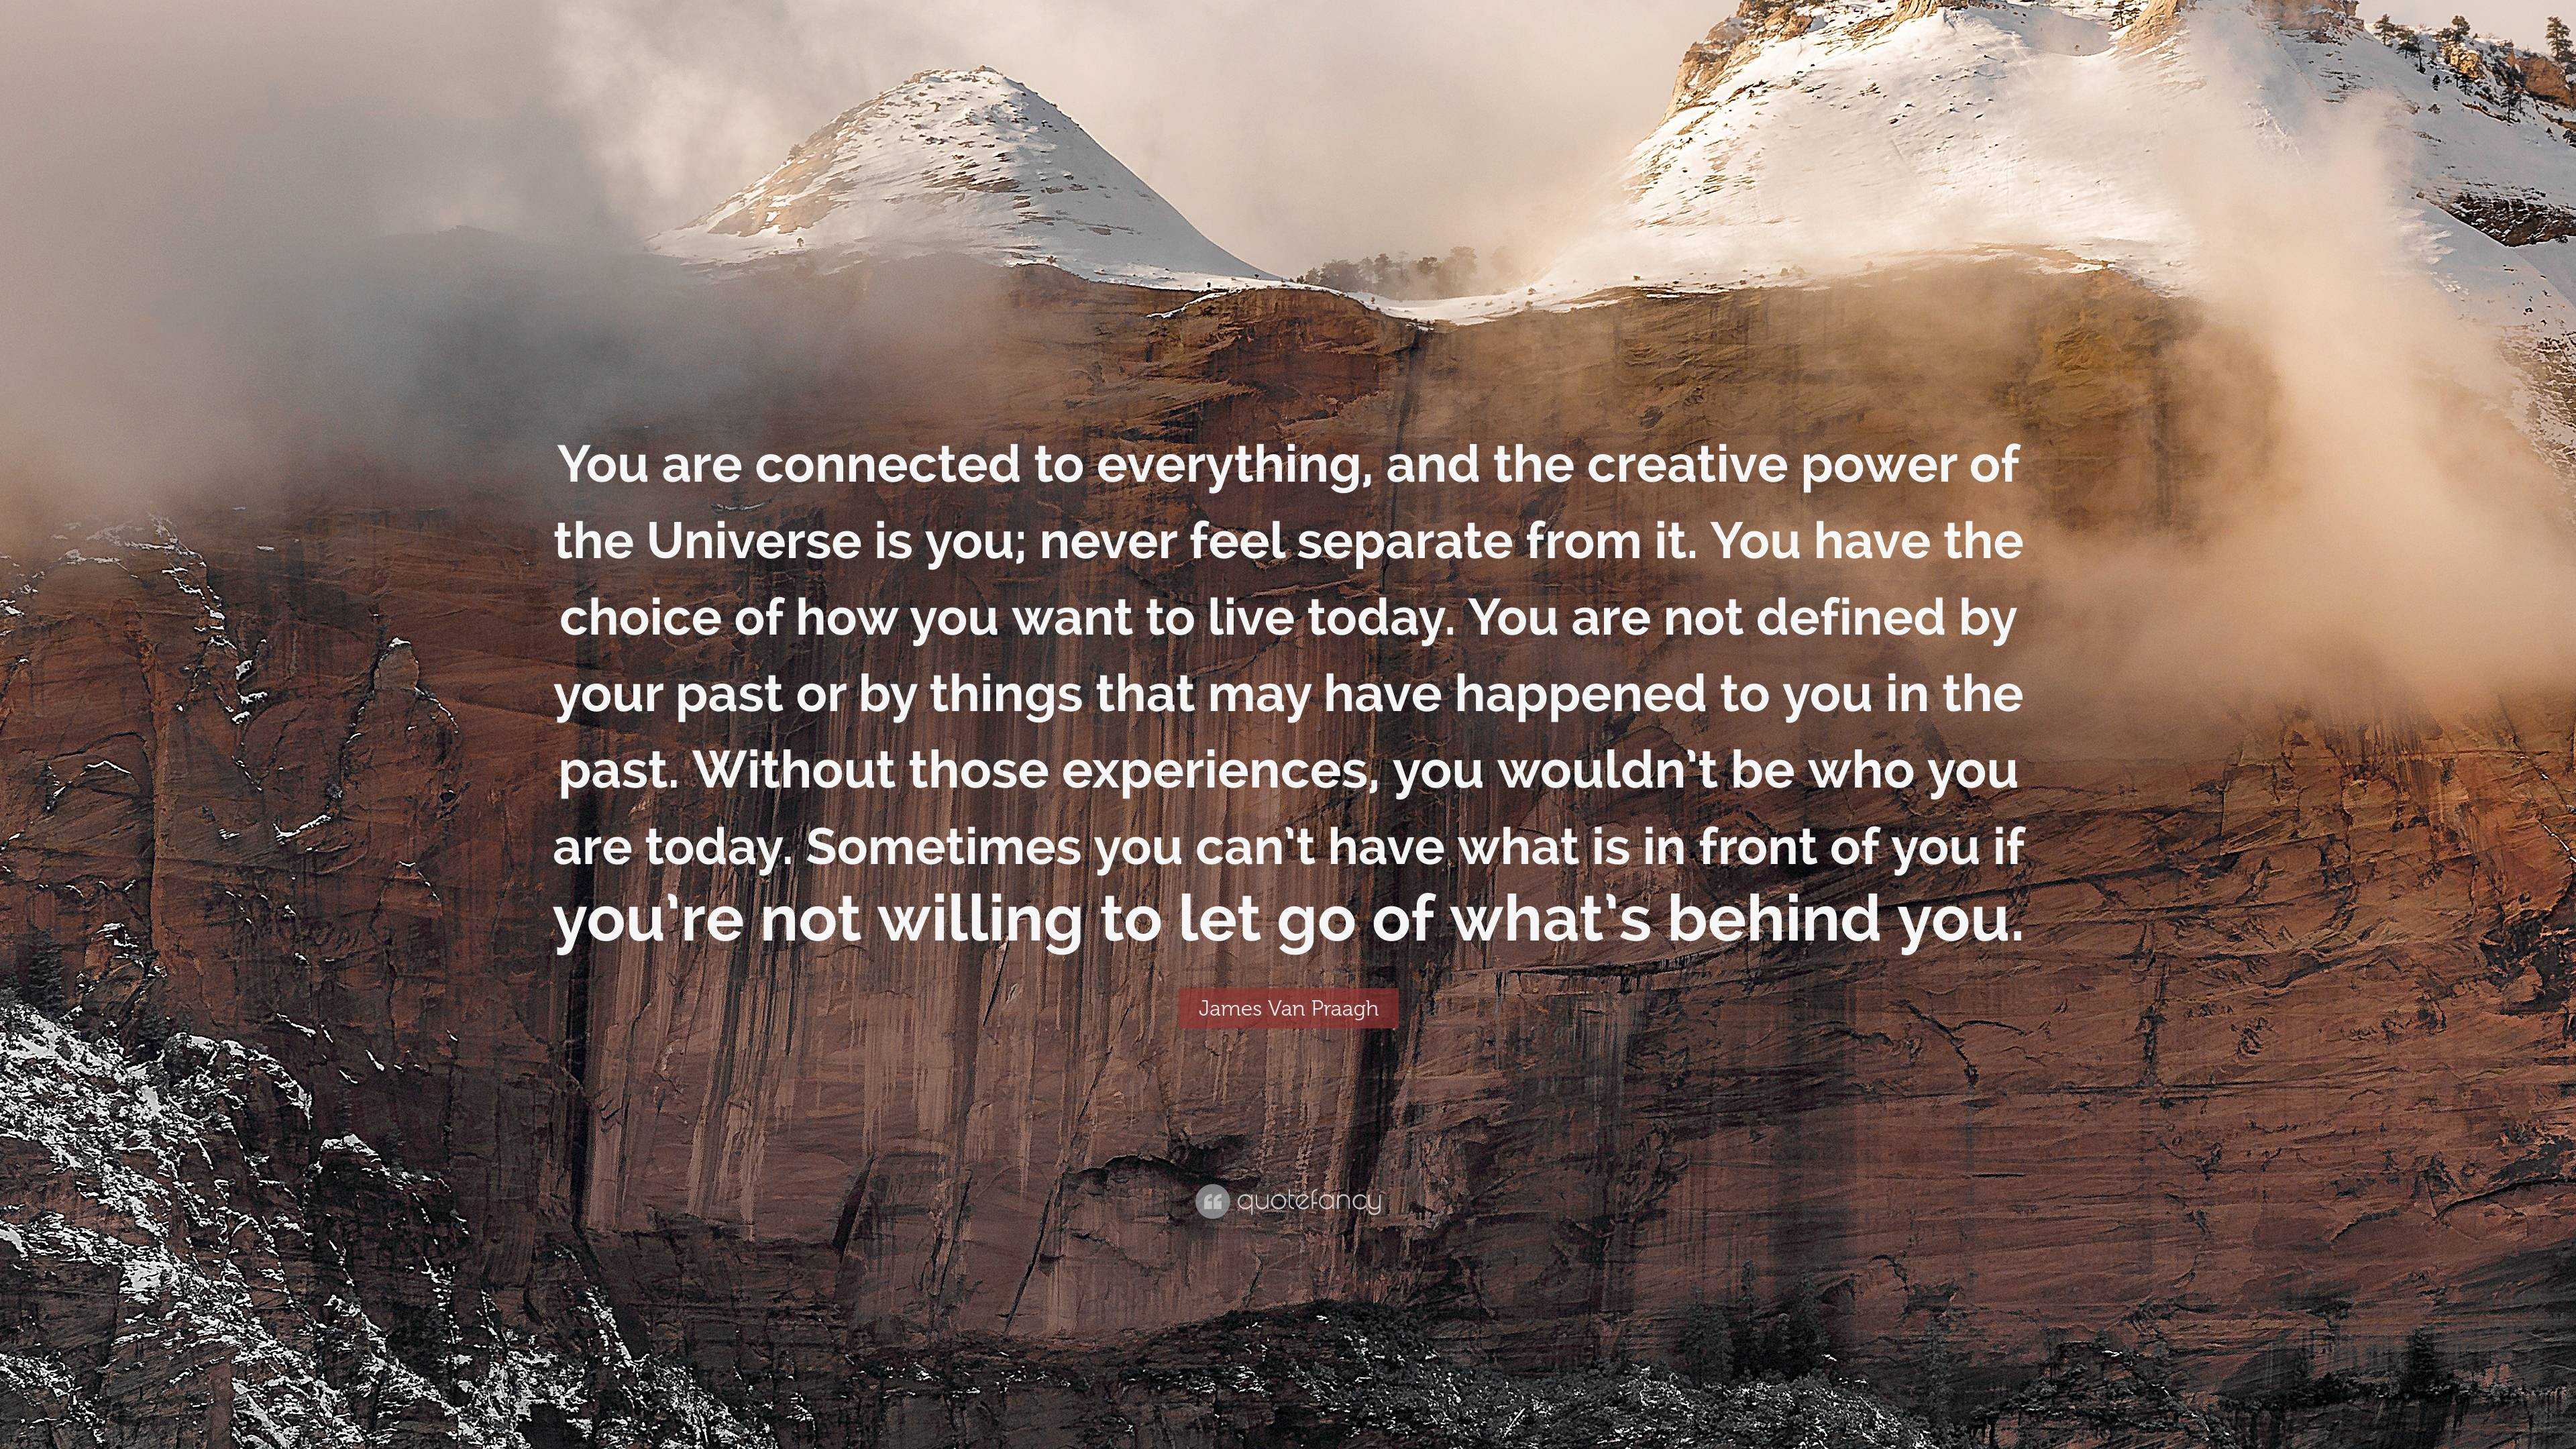 James Van Praagh Quote: “You are connected to everything, and the ...